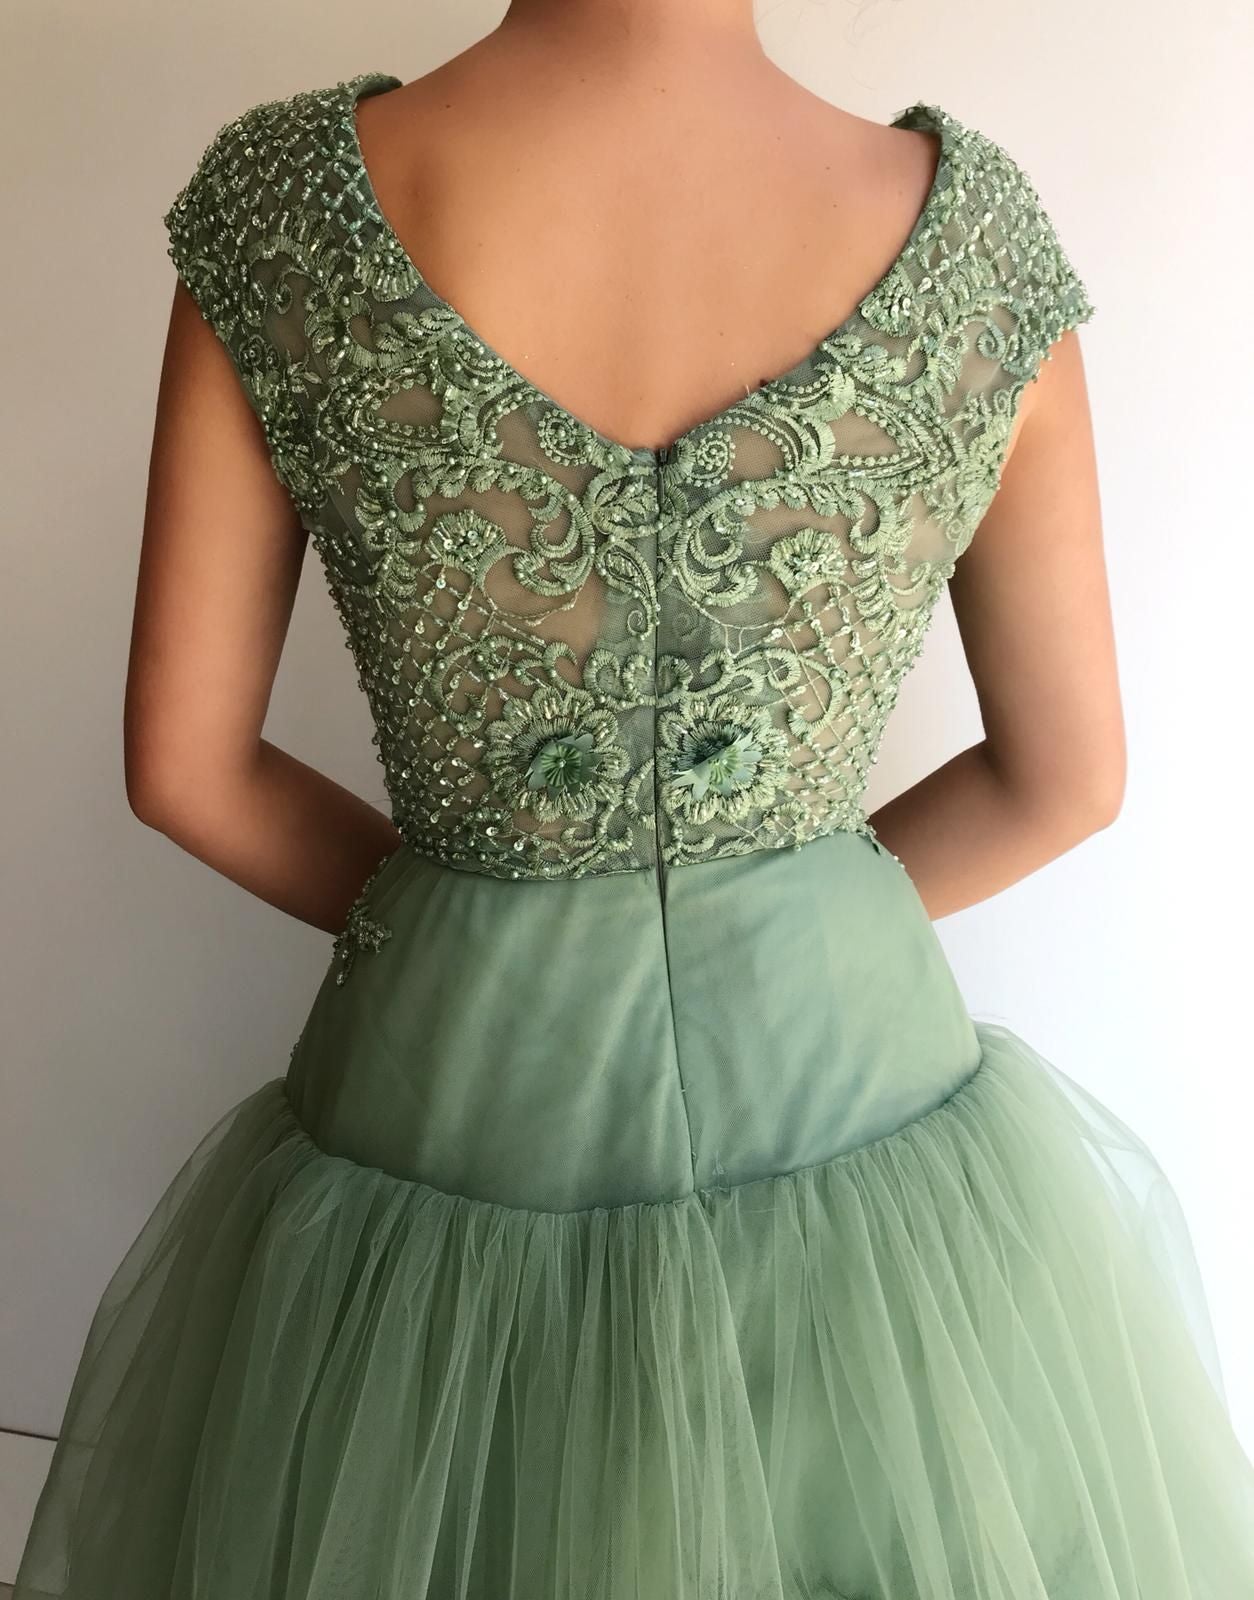 Green A-Line dress with no sleeves, v-neck and embroidery